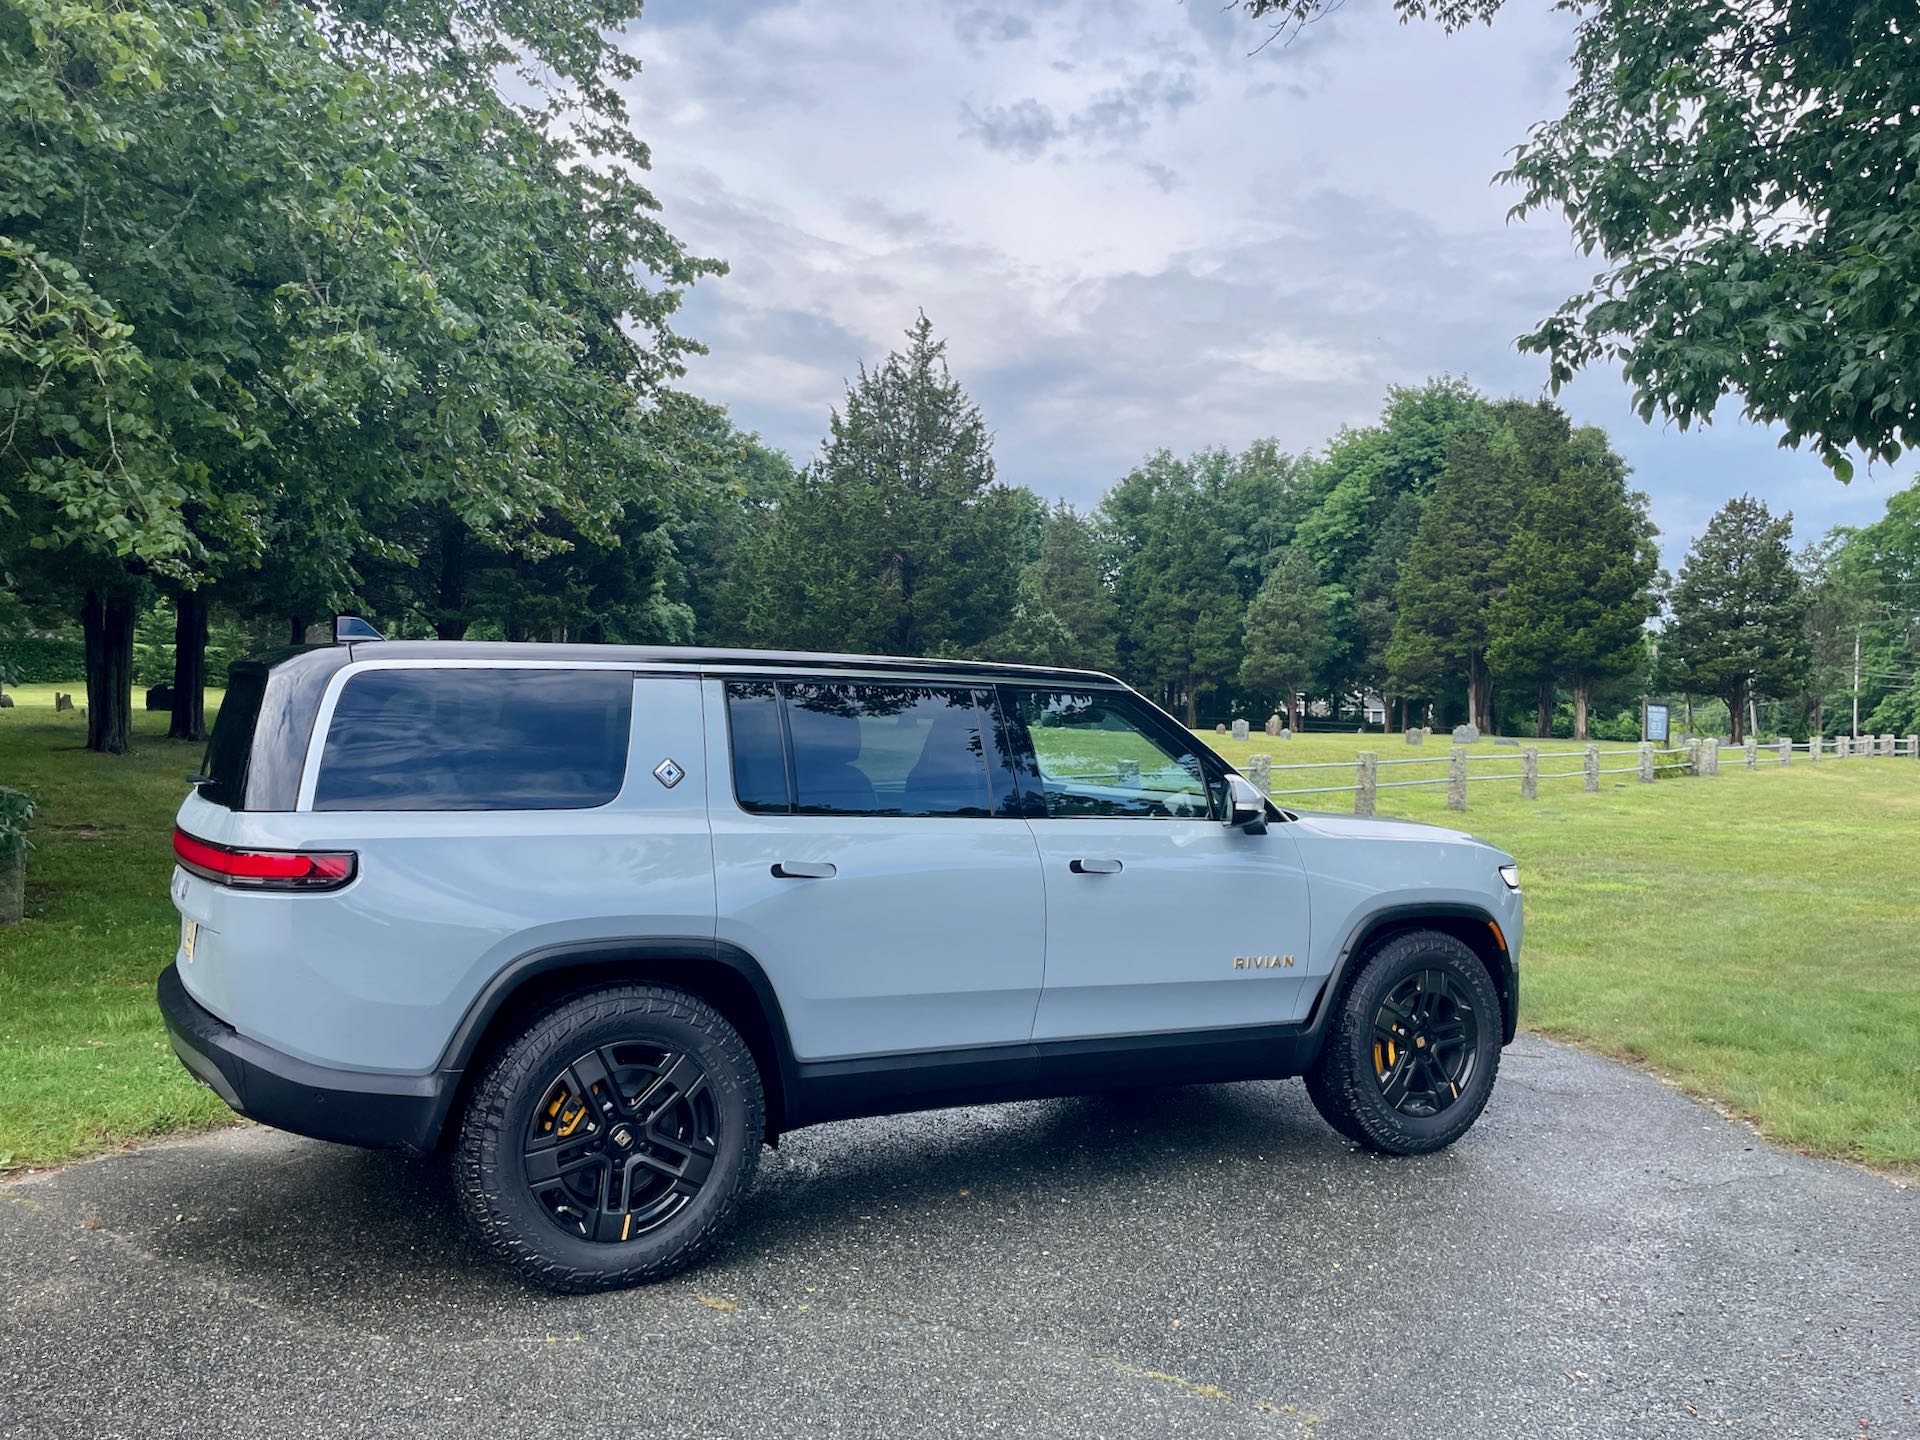 Finding Cape Cod’s New Pilgrims in the Rivian R1S